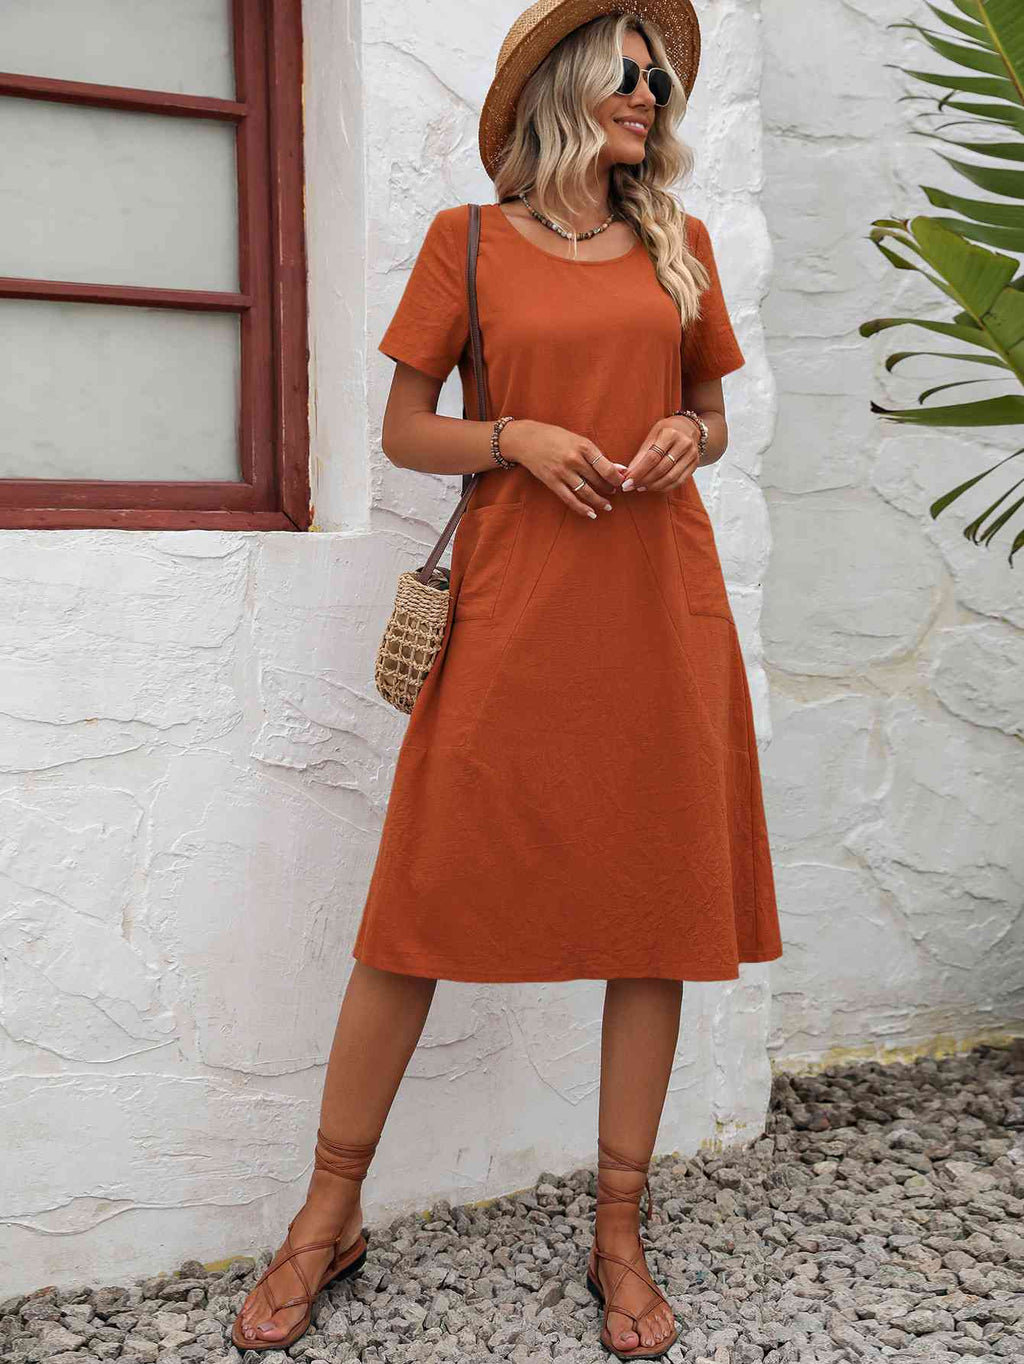 Round Neck Short Sleeve Dress with Pockets (4 Colors) Dress Krazy Heart Designs Boutique Terracotta S 